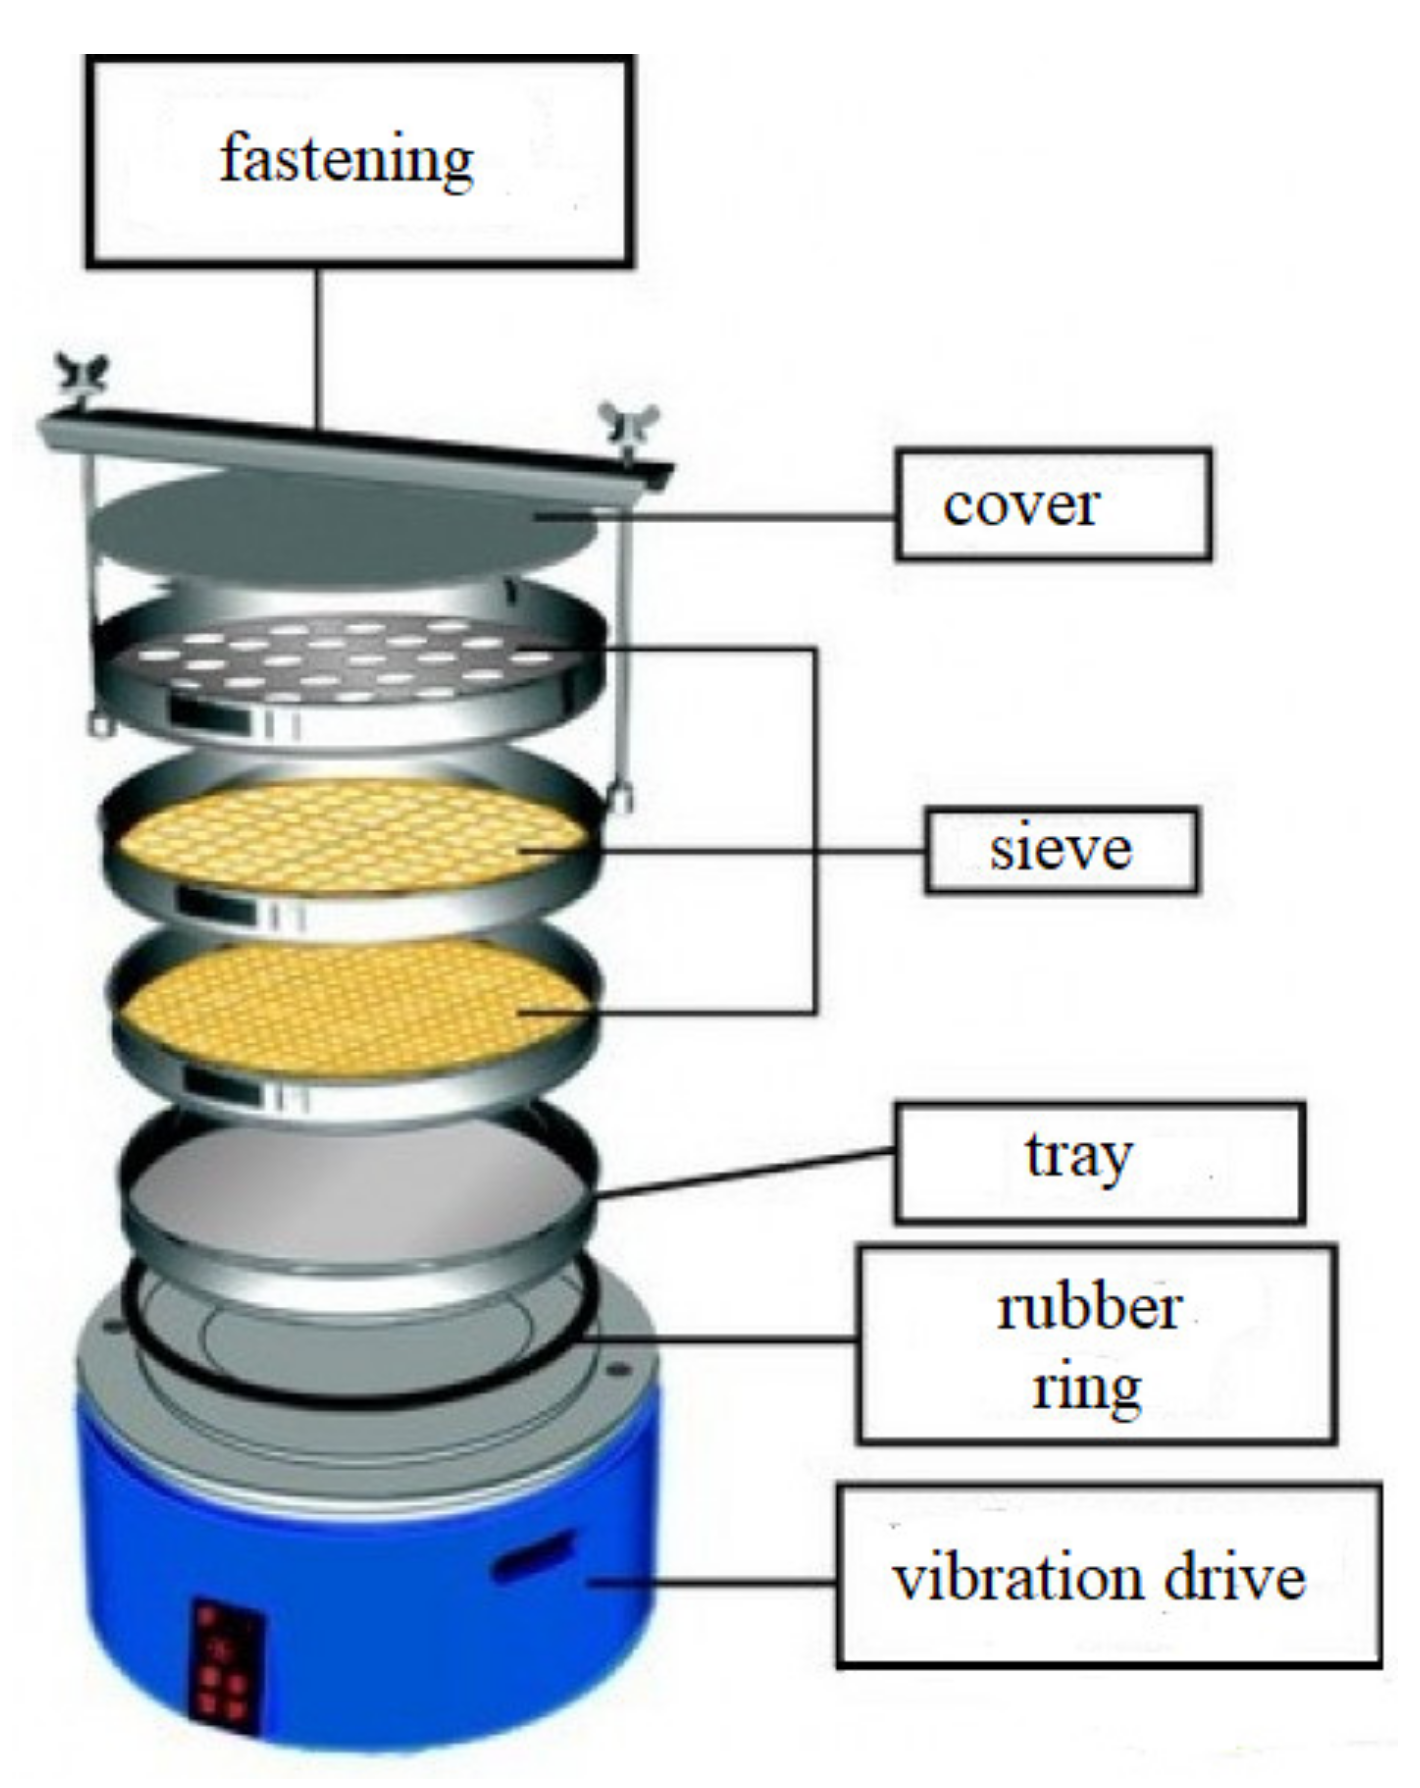 Illustration of sieve analysis process for particle size distribution gradation